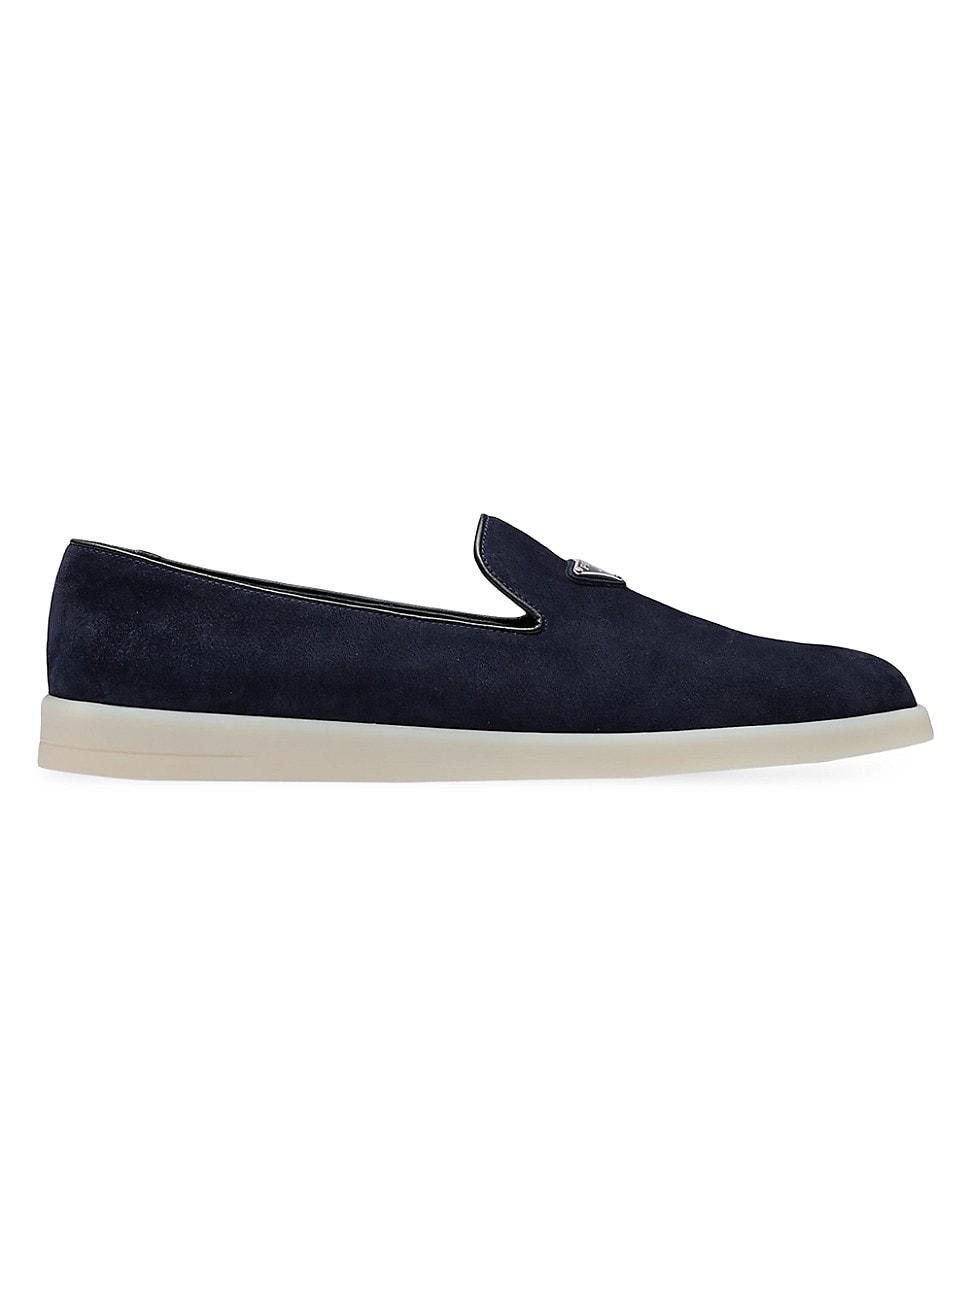 Mens Suede Slippers Product Image